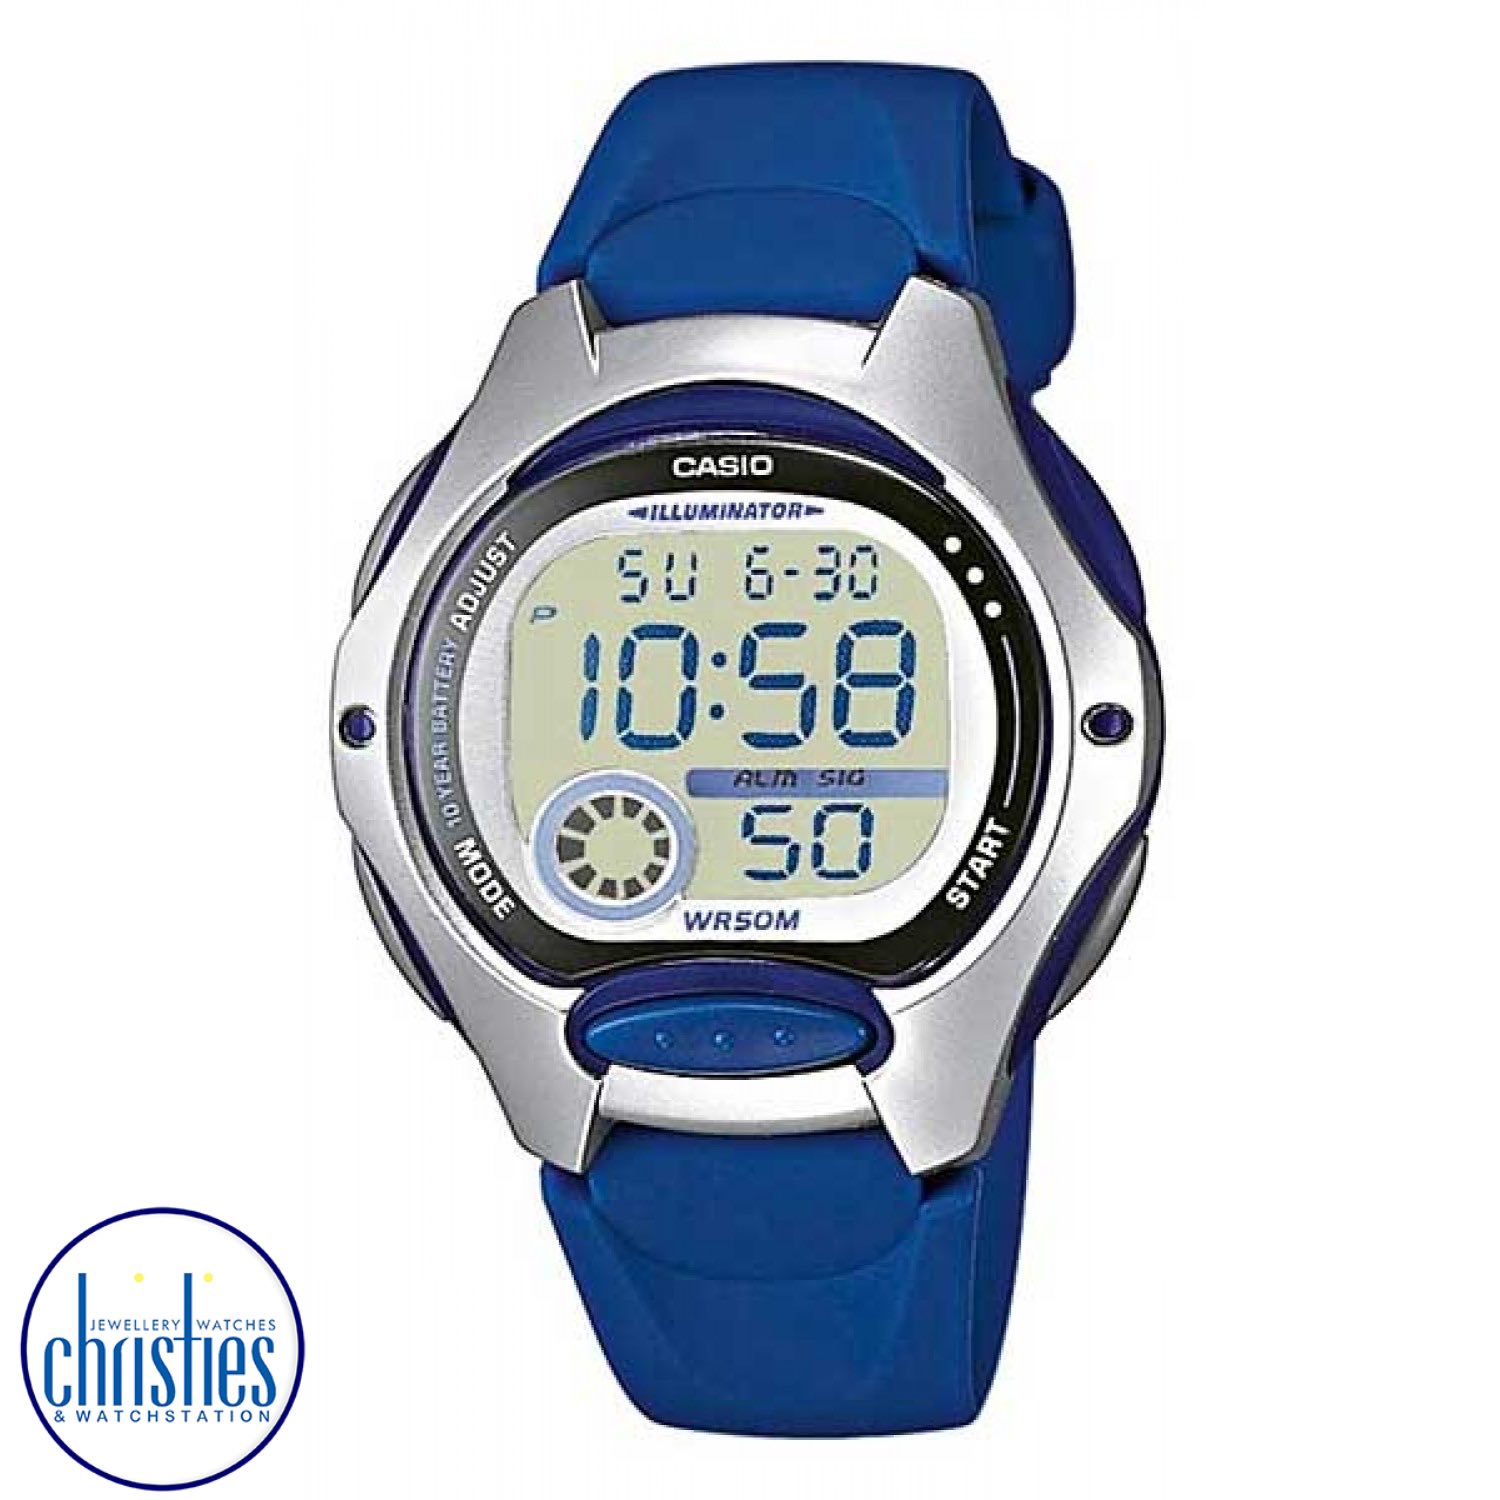 LW200-2A Casio 50 Metres Kids Watch. Casio’s LW200 Illuminator digital watch is a sleek and sporty timepiece featuring a Dark Blue plastic resin band, a metallic resin case and a large digital time display with stopwatch and day and date functions. Water-